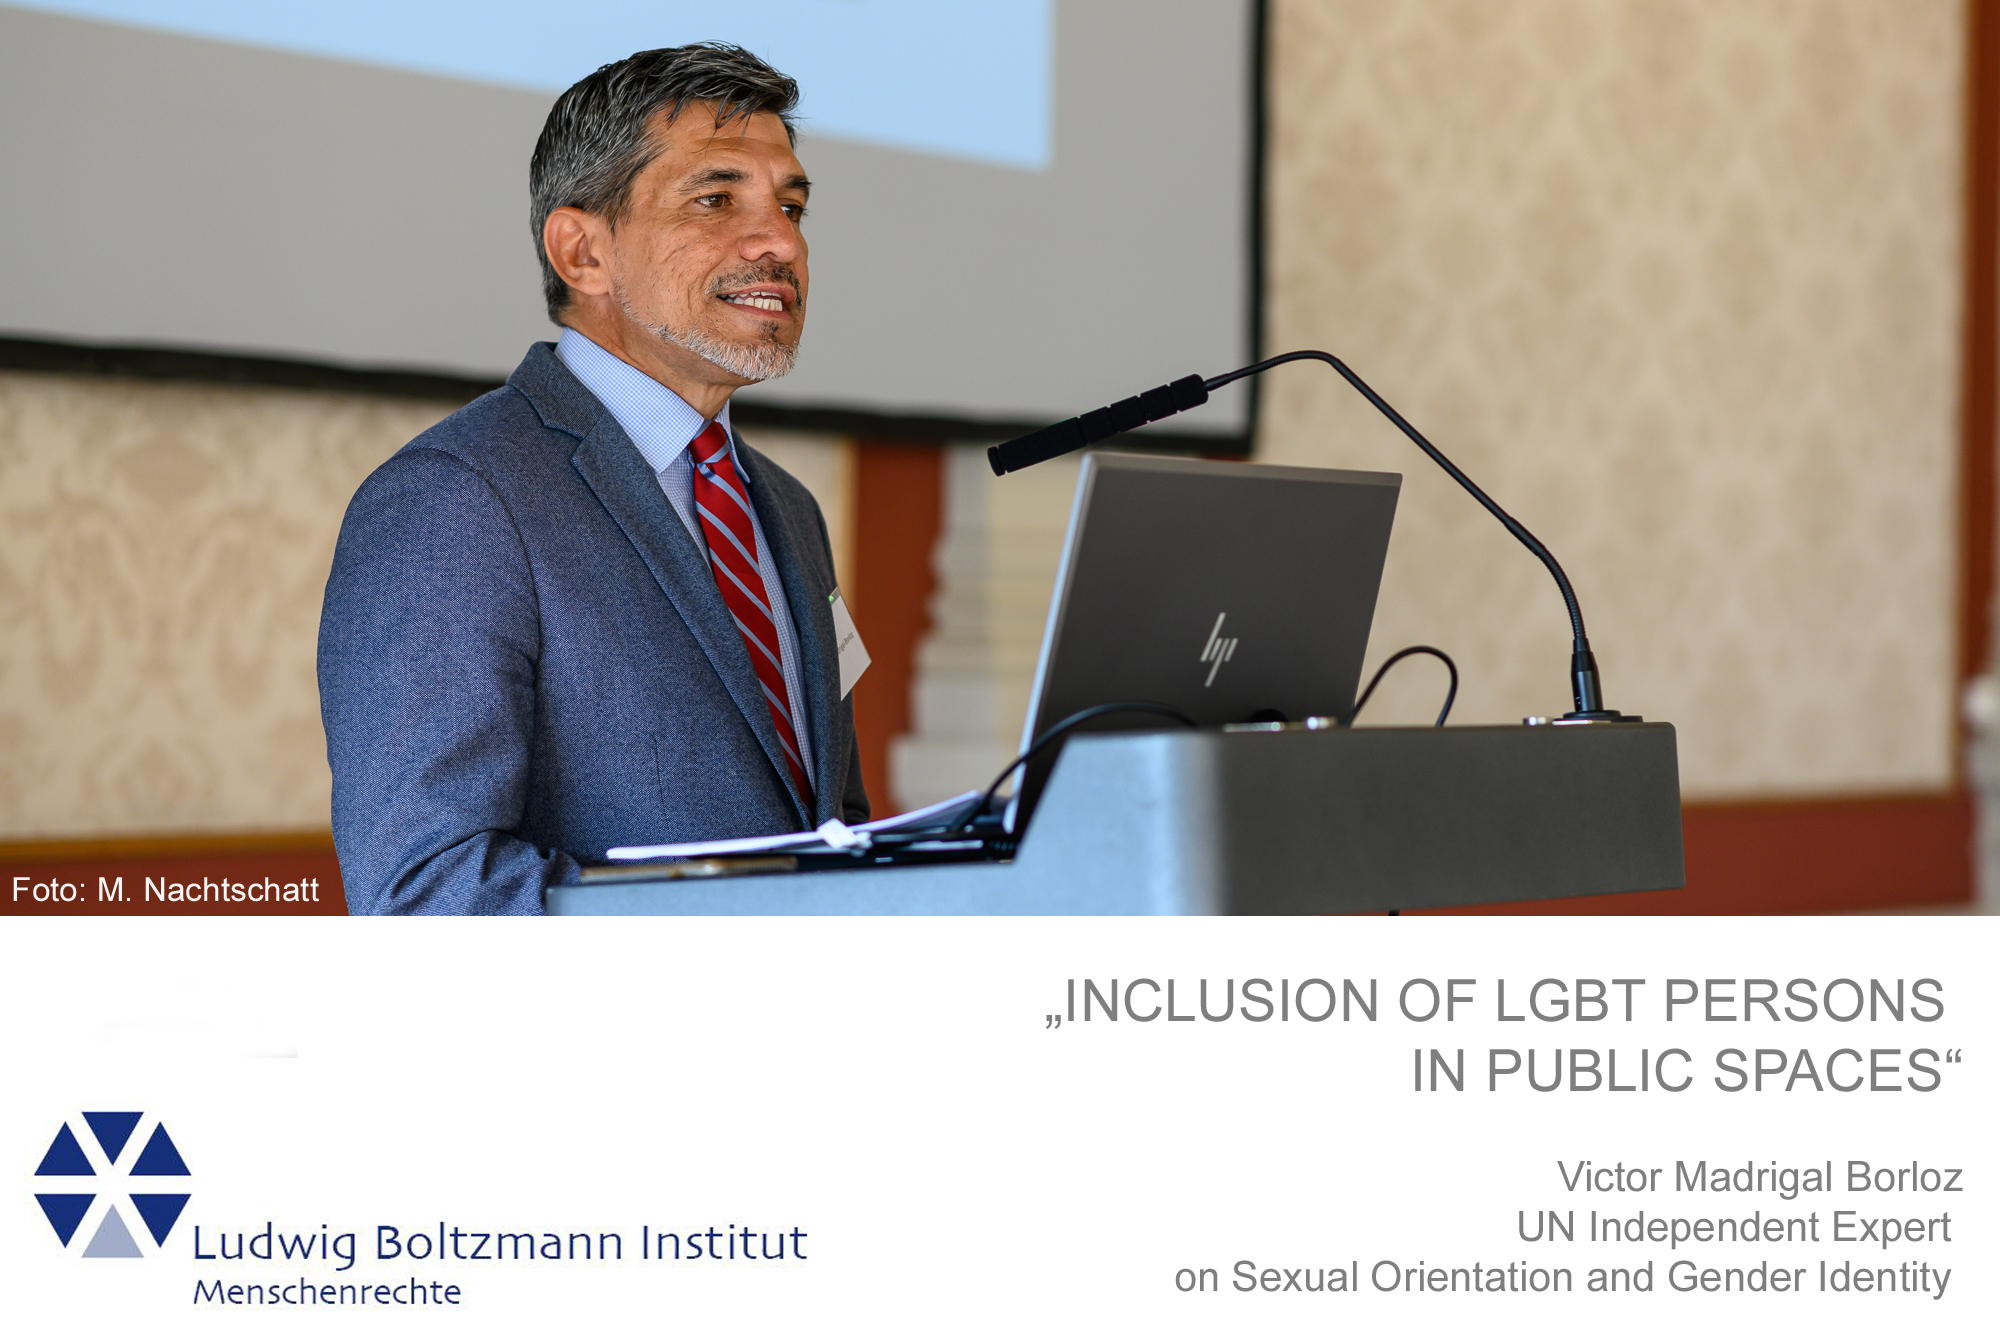 Audio: Inclusion of LGBT Persons in Public Spaces, Victor Madrigal Borloz